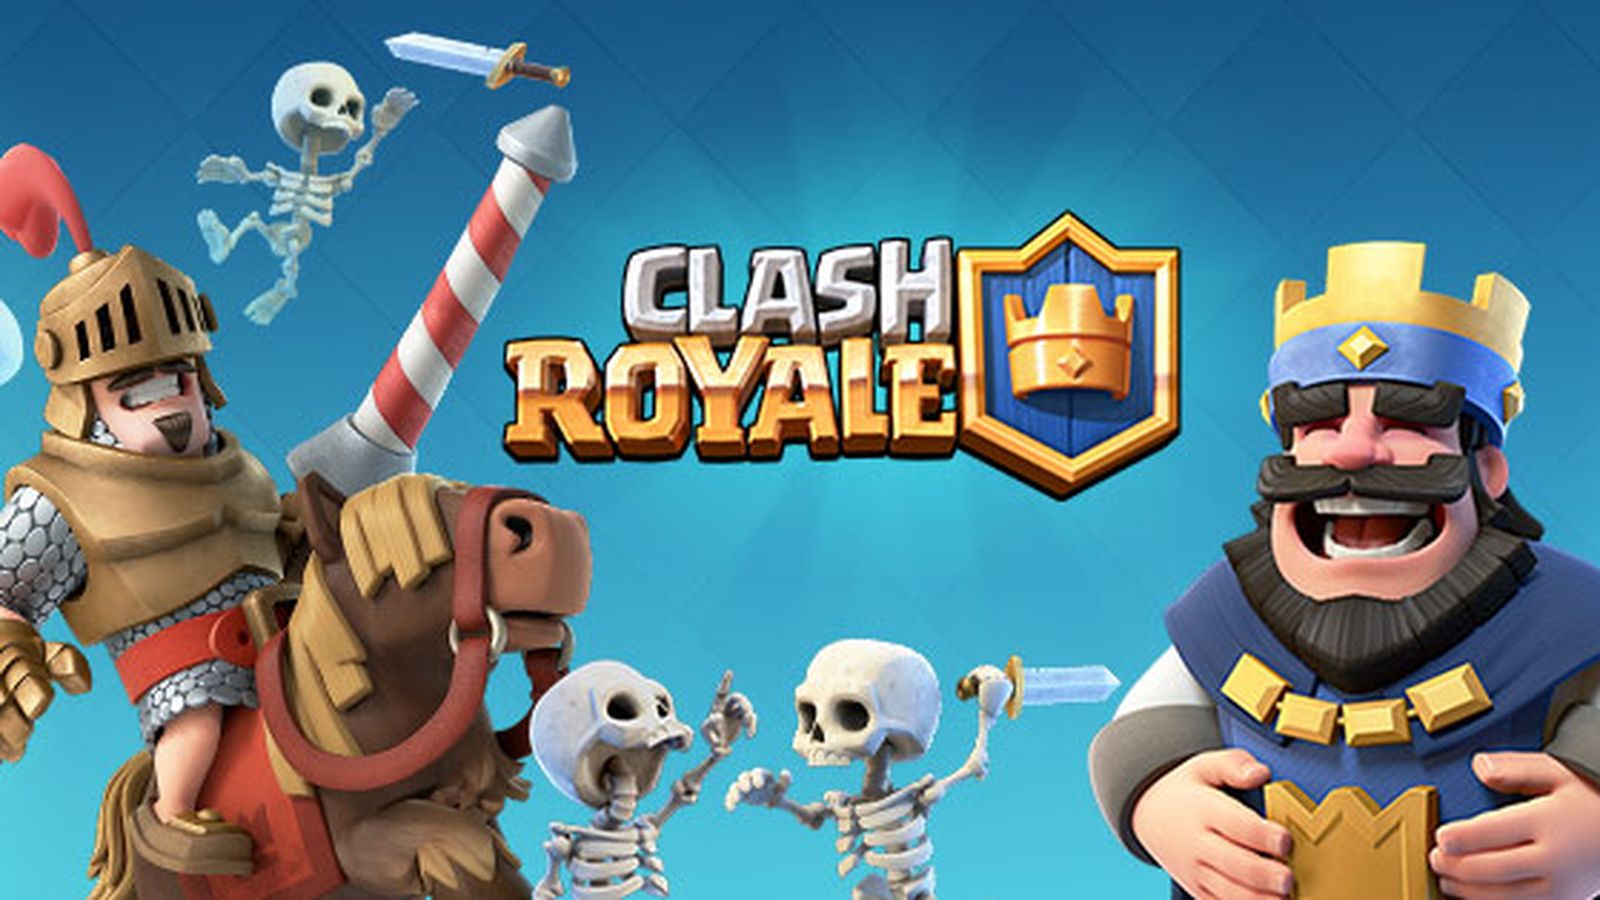 Working Clash Royale hack for iOS and Android devices